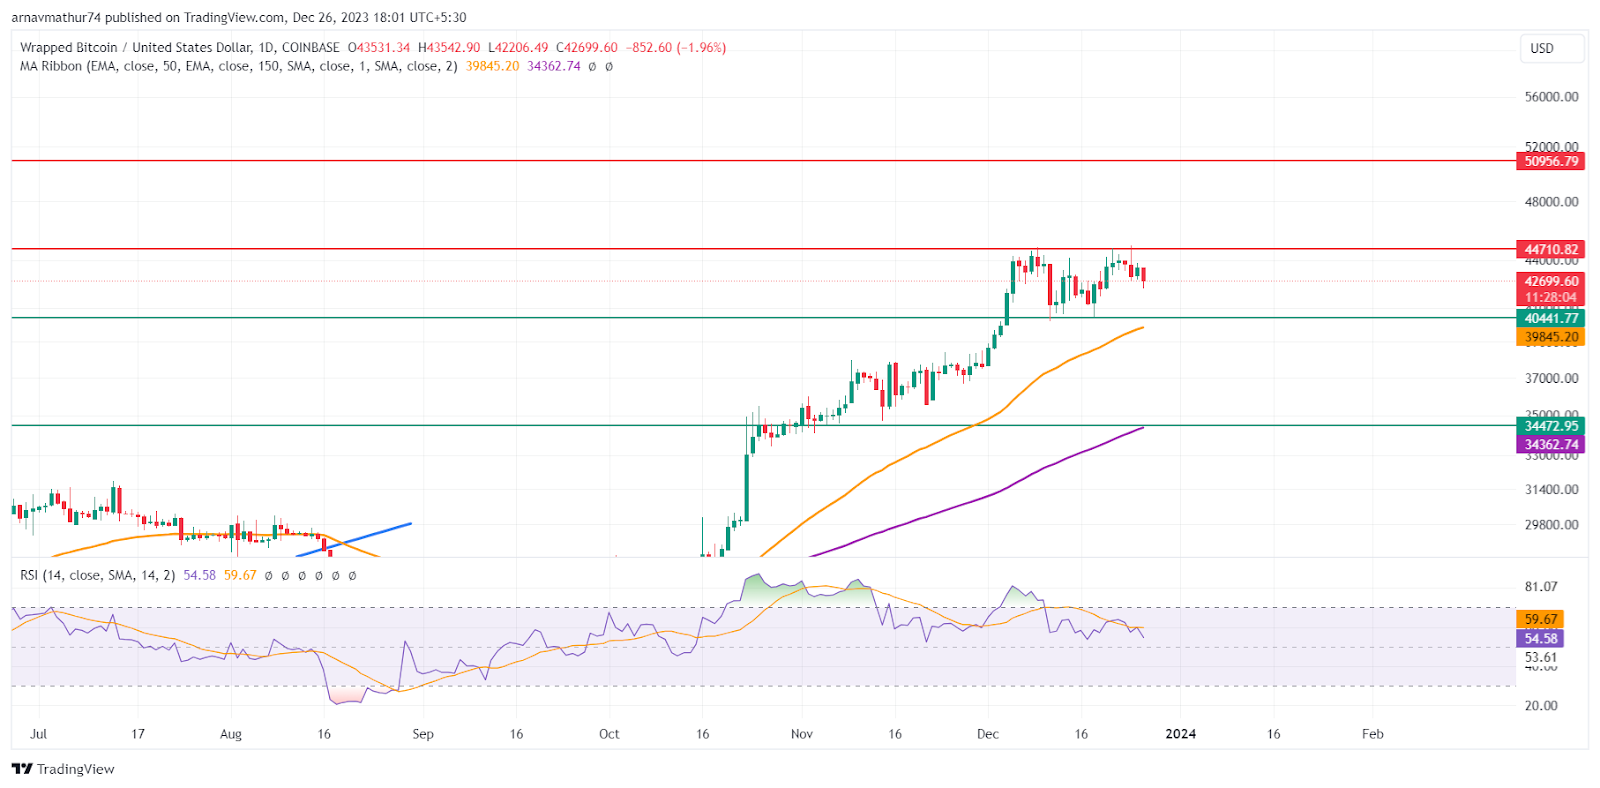 WBTC Coin Price Analysis: Uptrend Continues in Wrapped Bitcoin